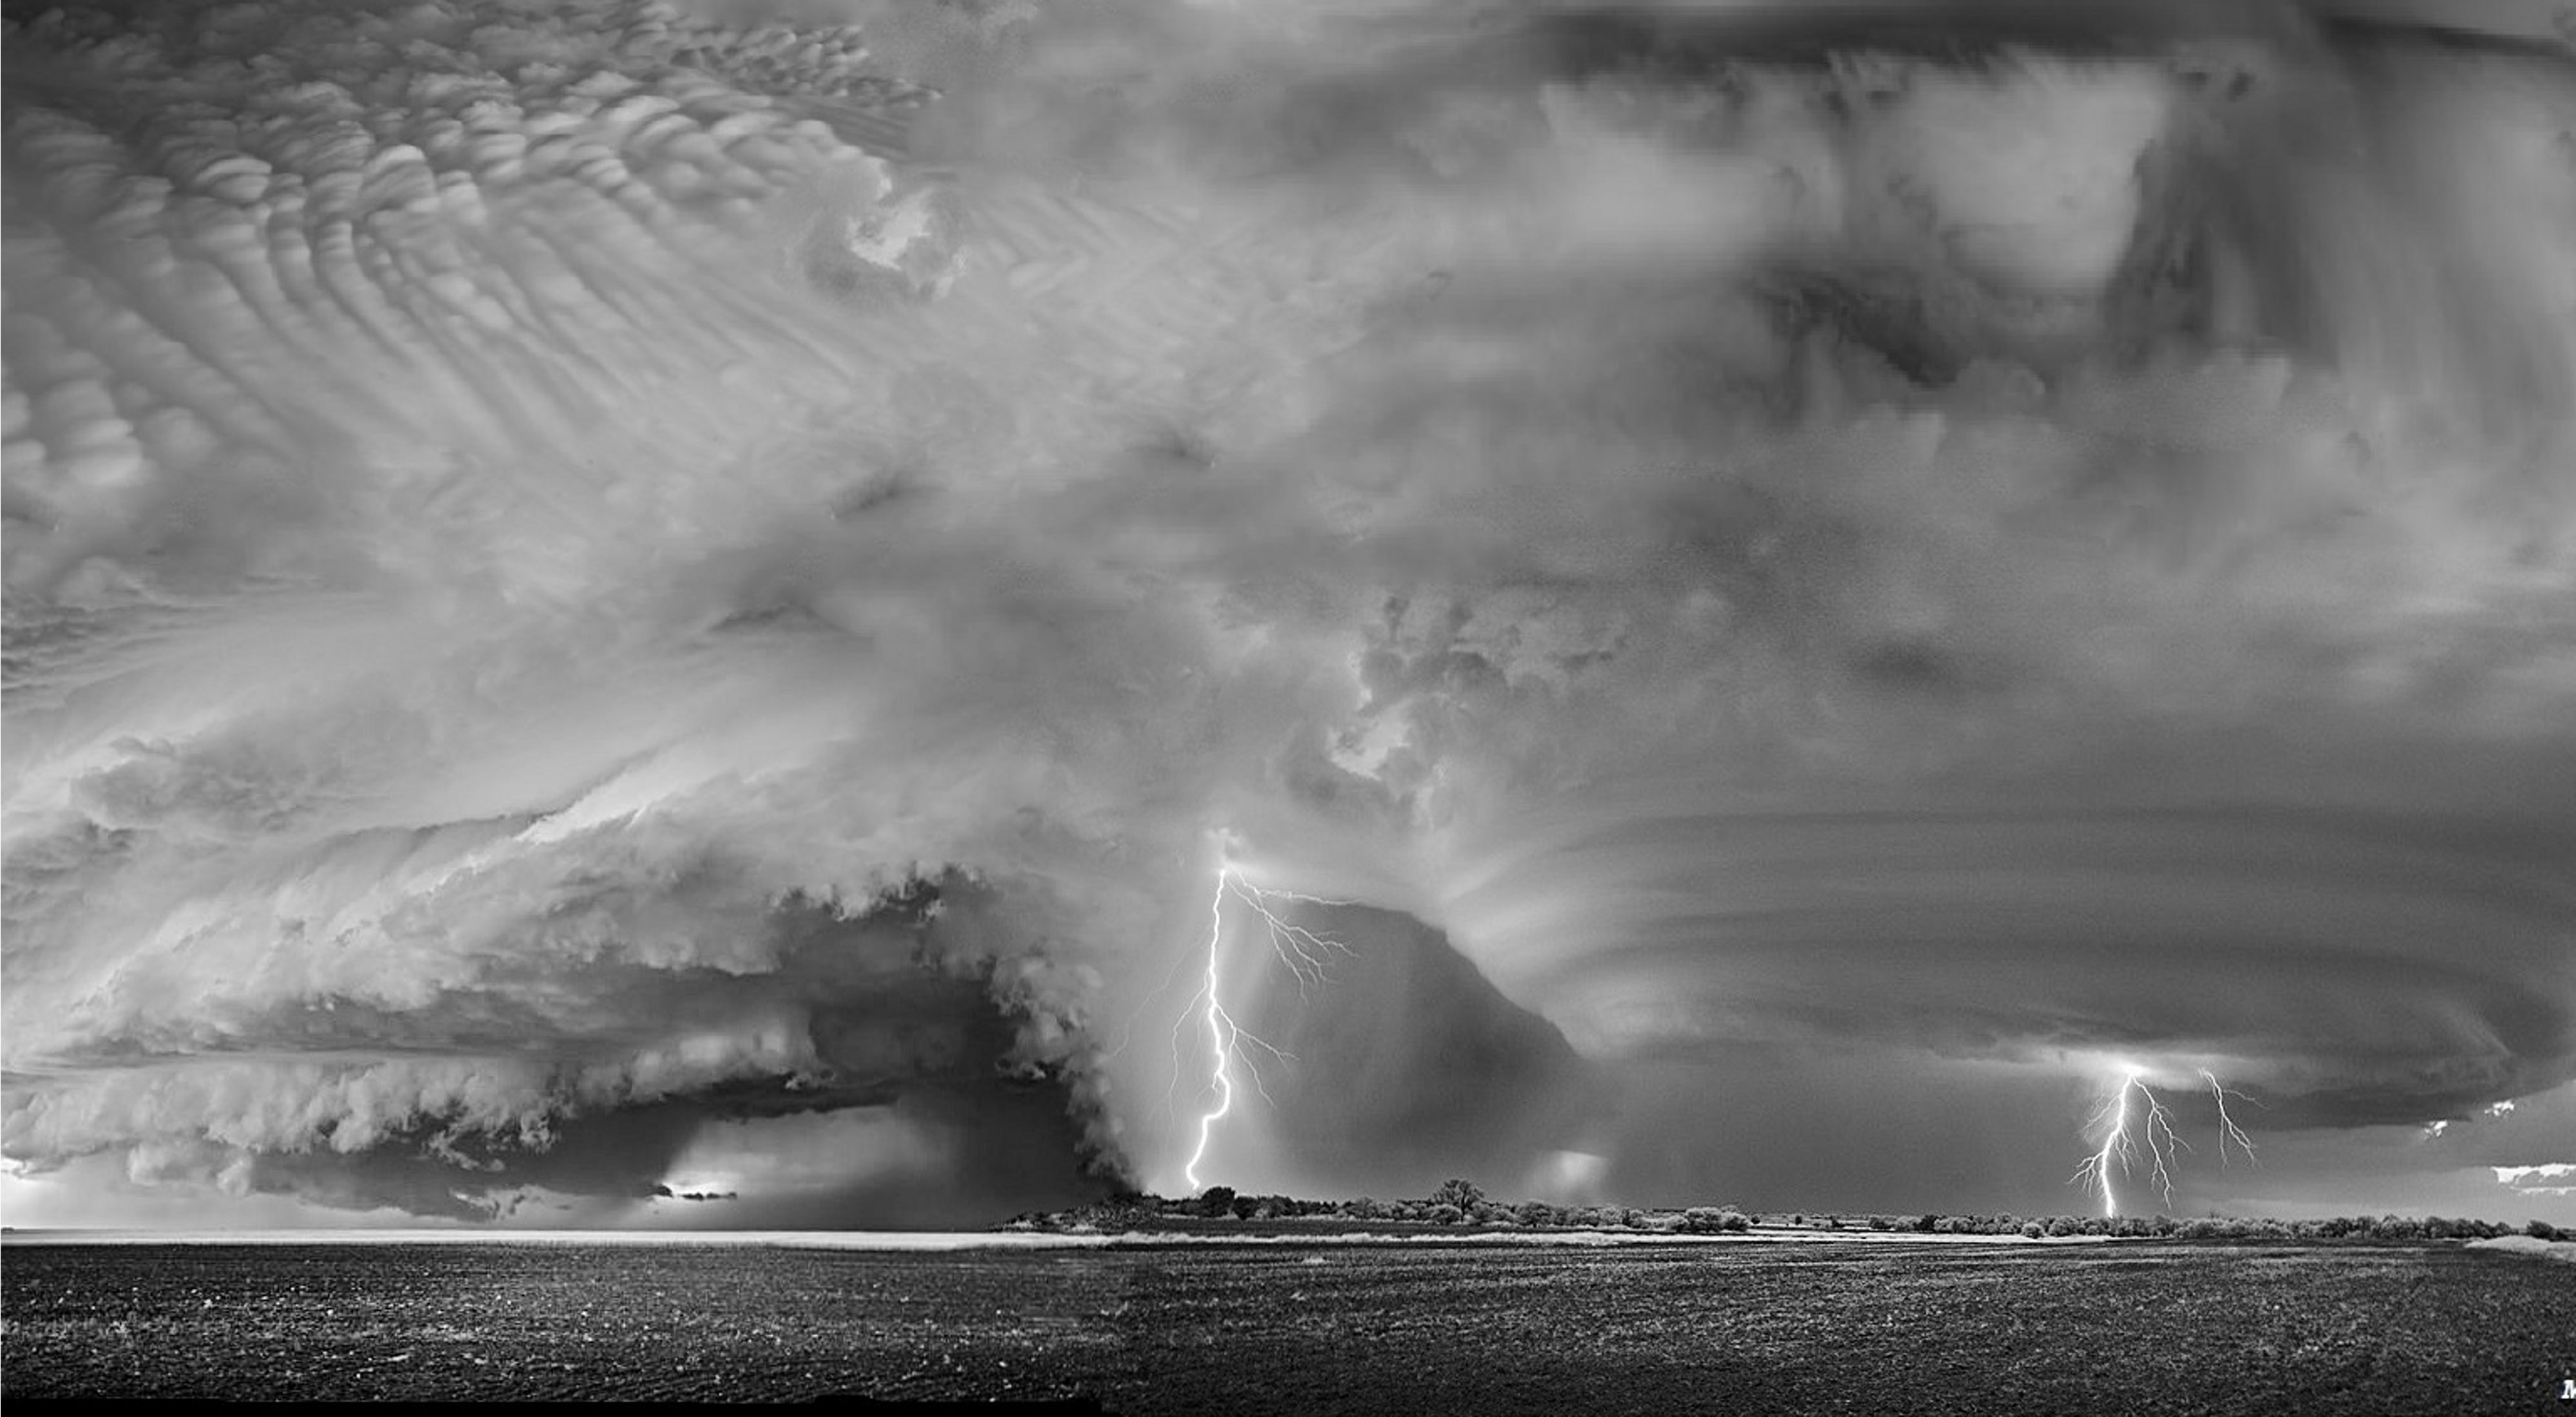 Lightning strikes from a massive swirling stormcloud 